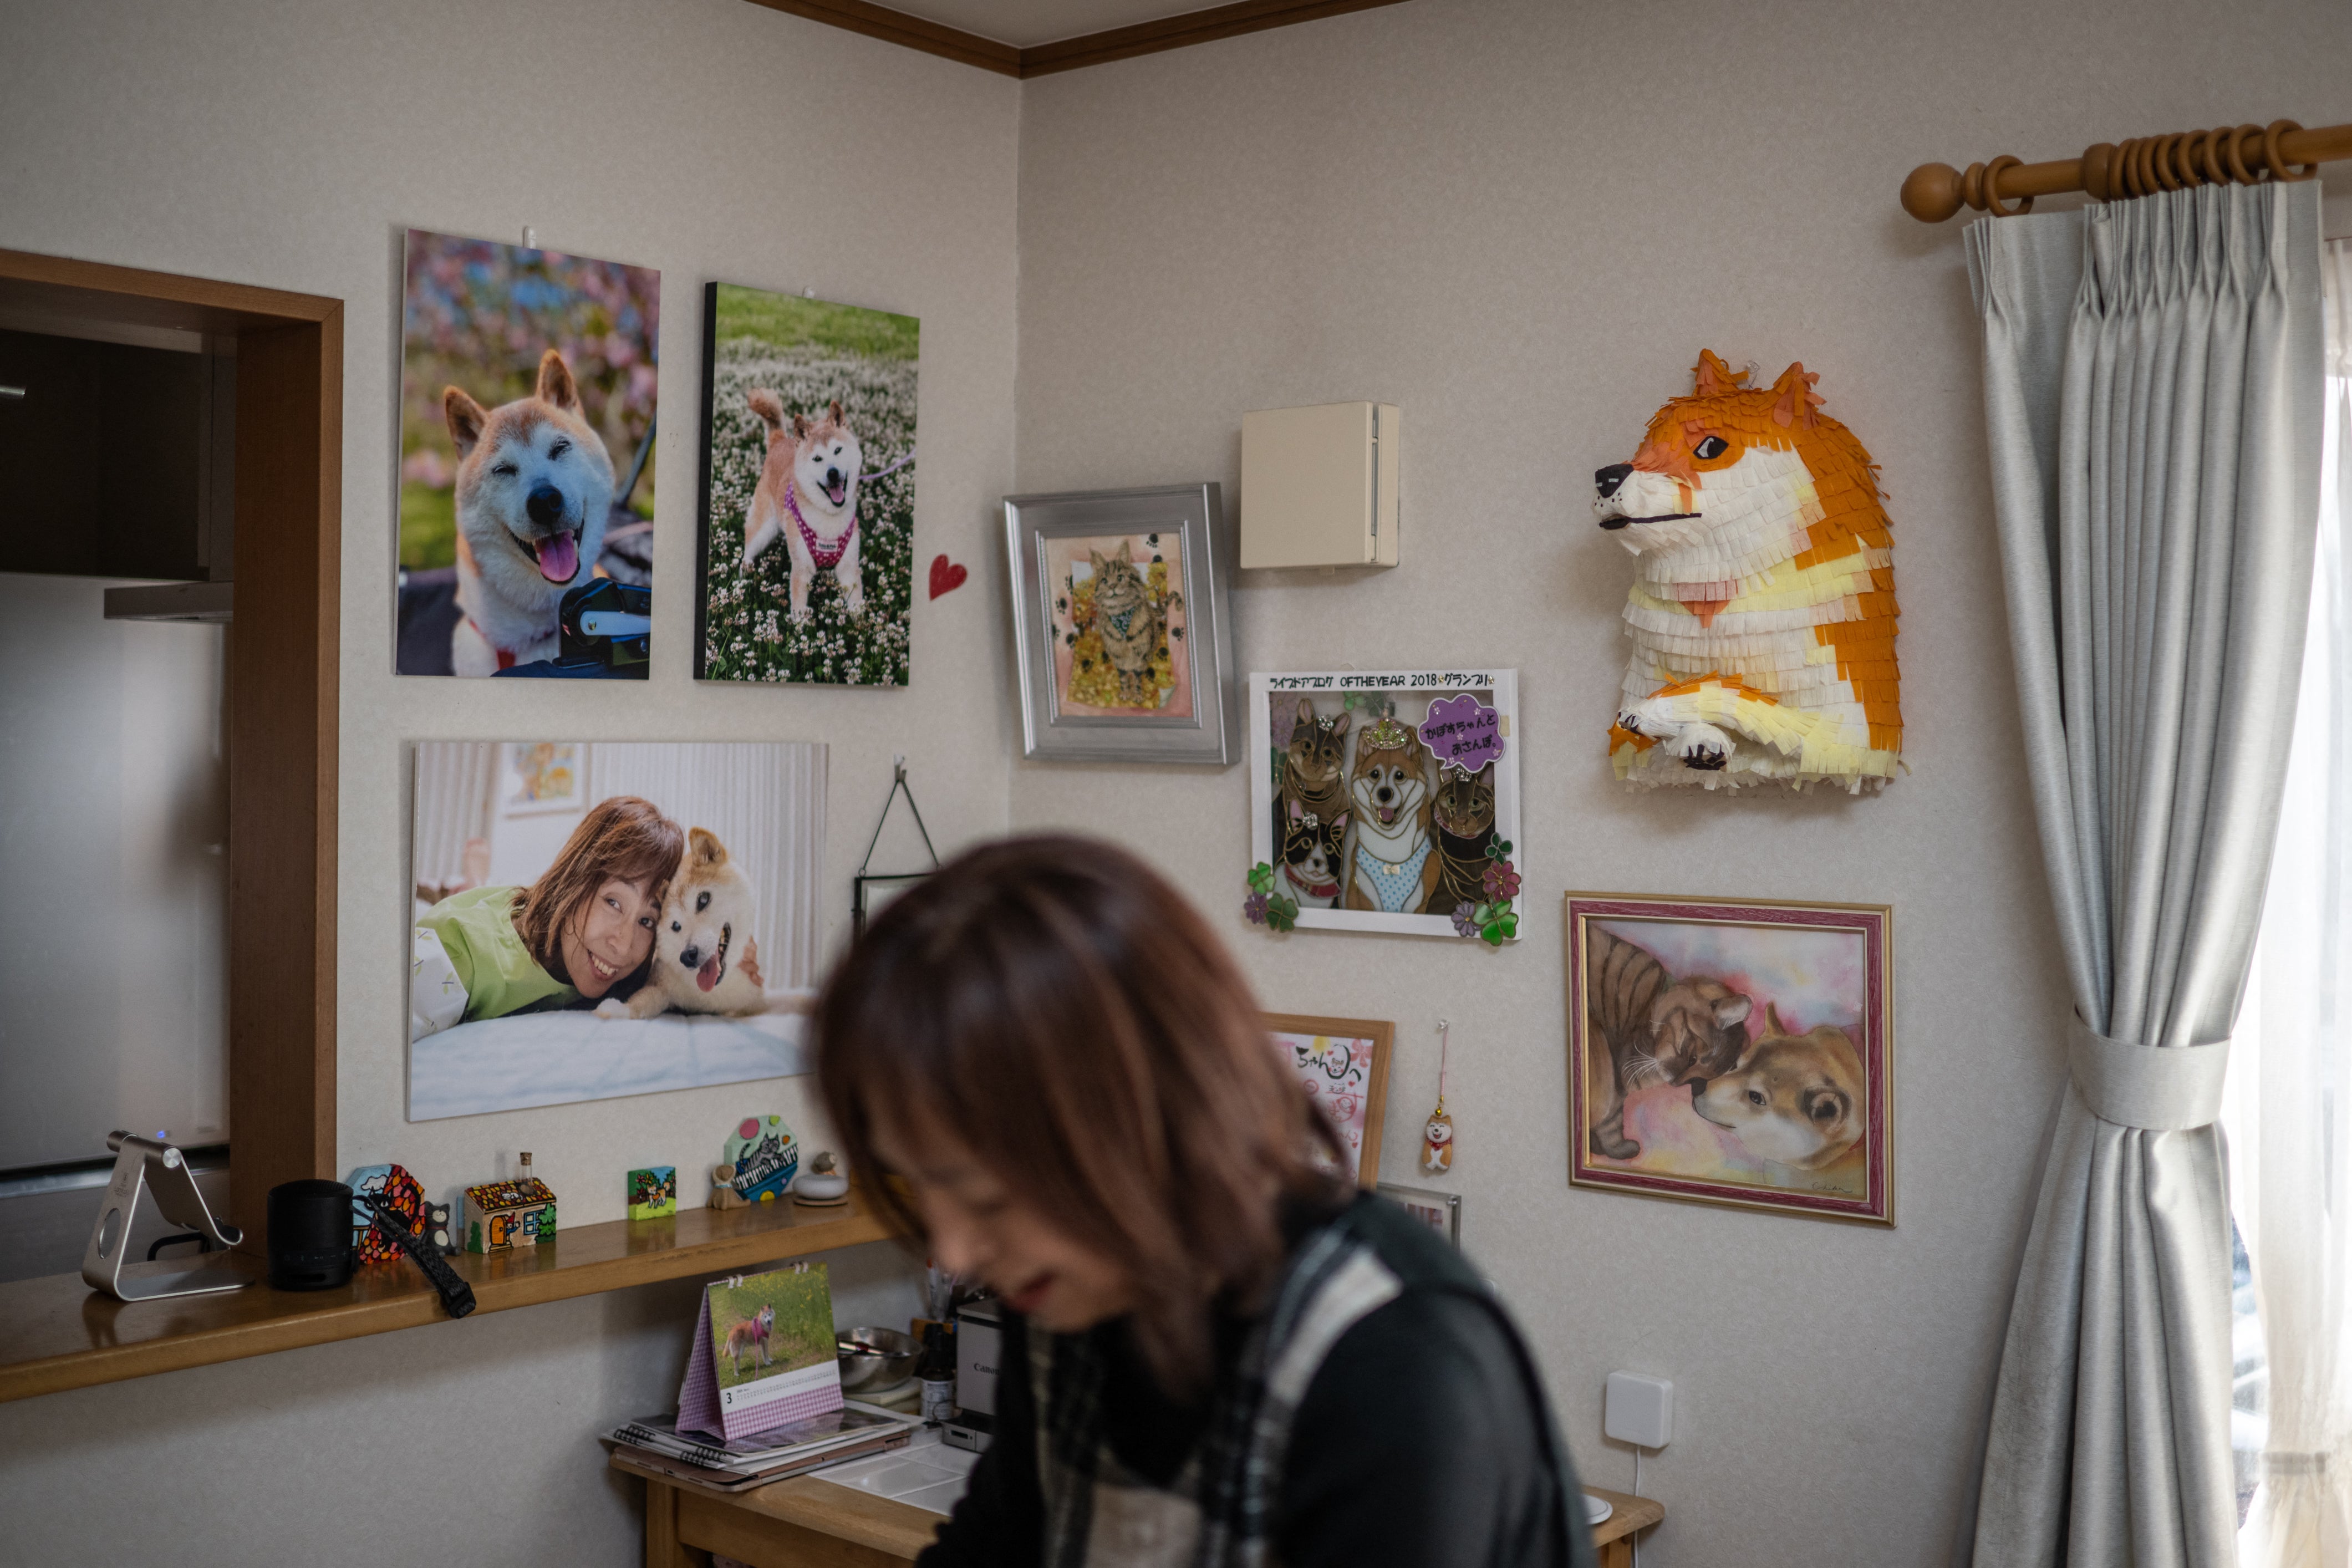 Pictures and products of Japanese shiba inu dog Kabosu, best known as the logo of cryptocurrency Dogecoin, on display at the home of her owner Atsuko Sato in the city of Sakura